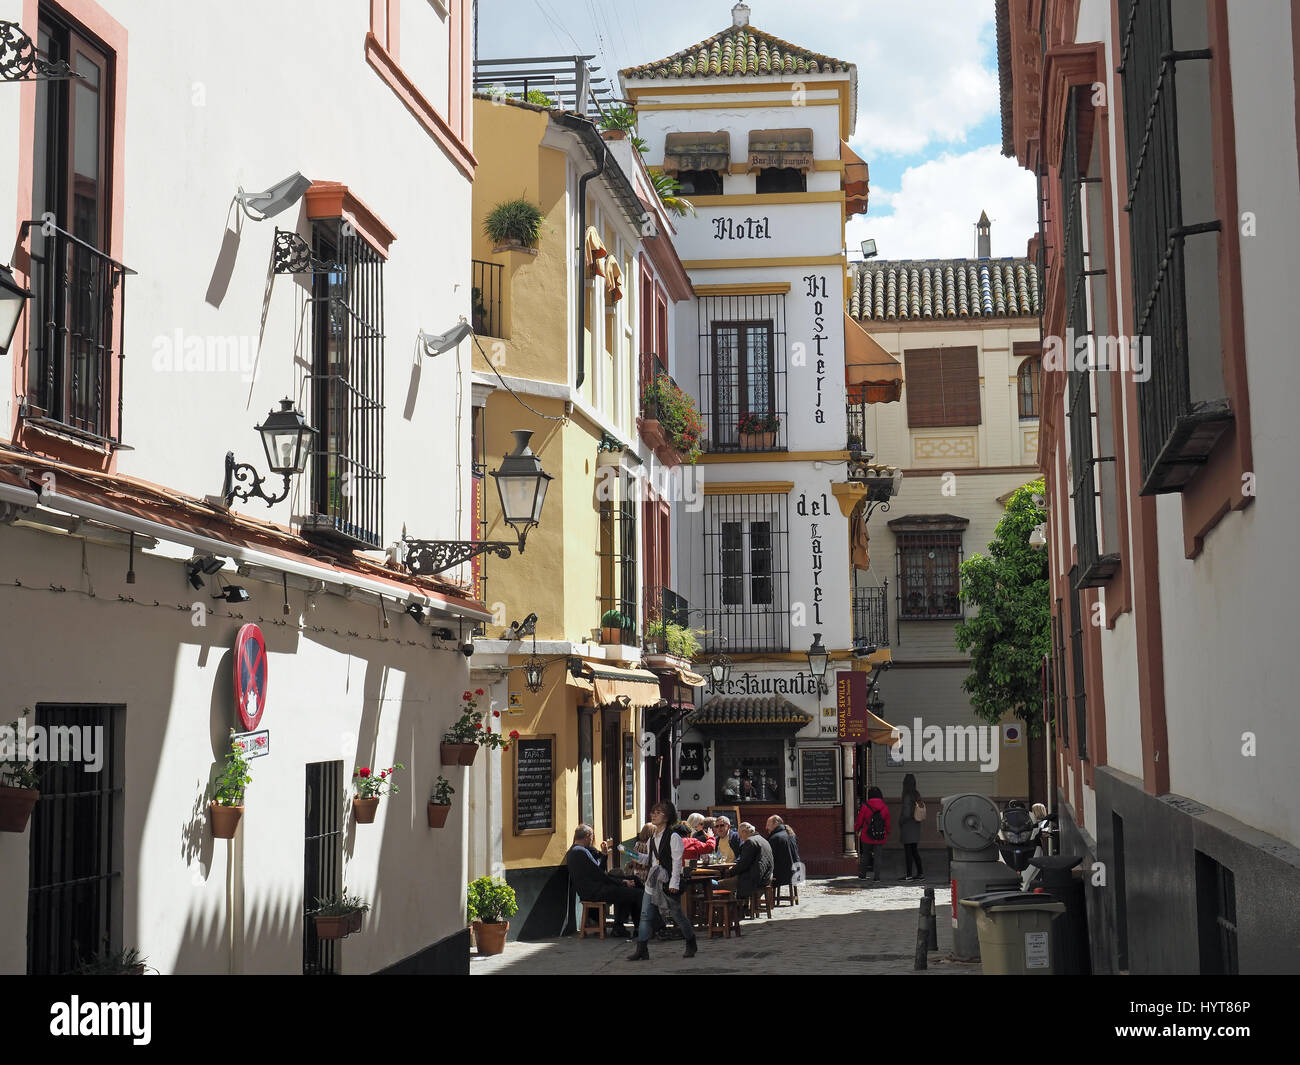 View of a narrow street in the Barrio Santa Cruz district of Seville in Spain Stock Photo